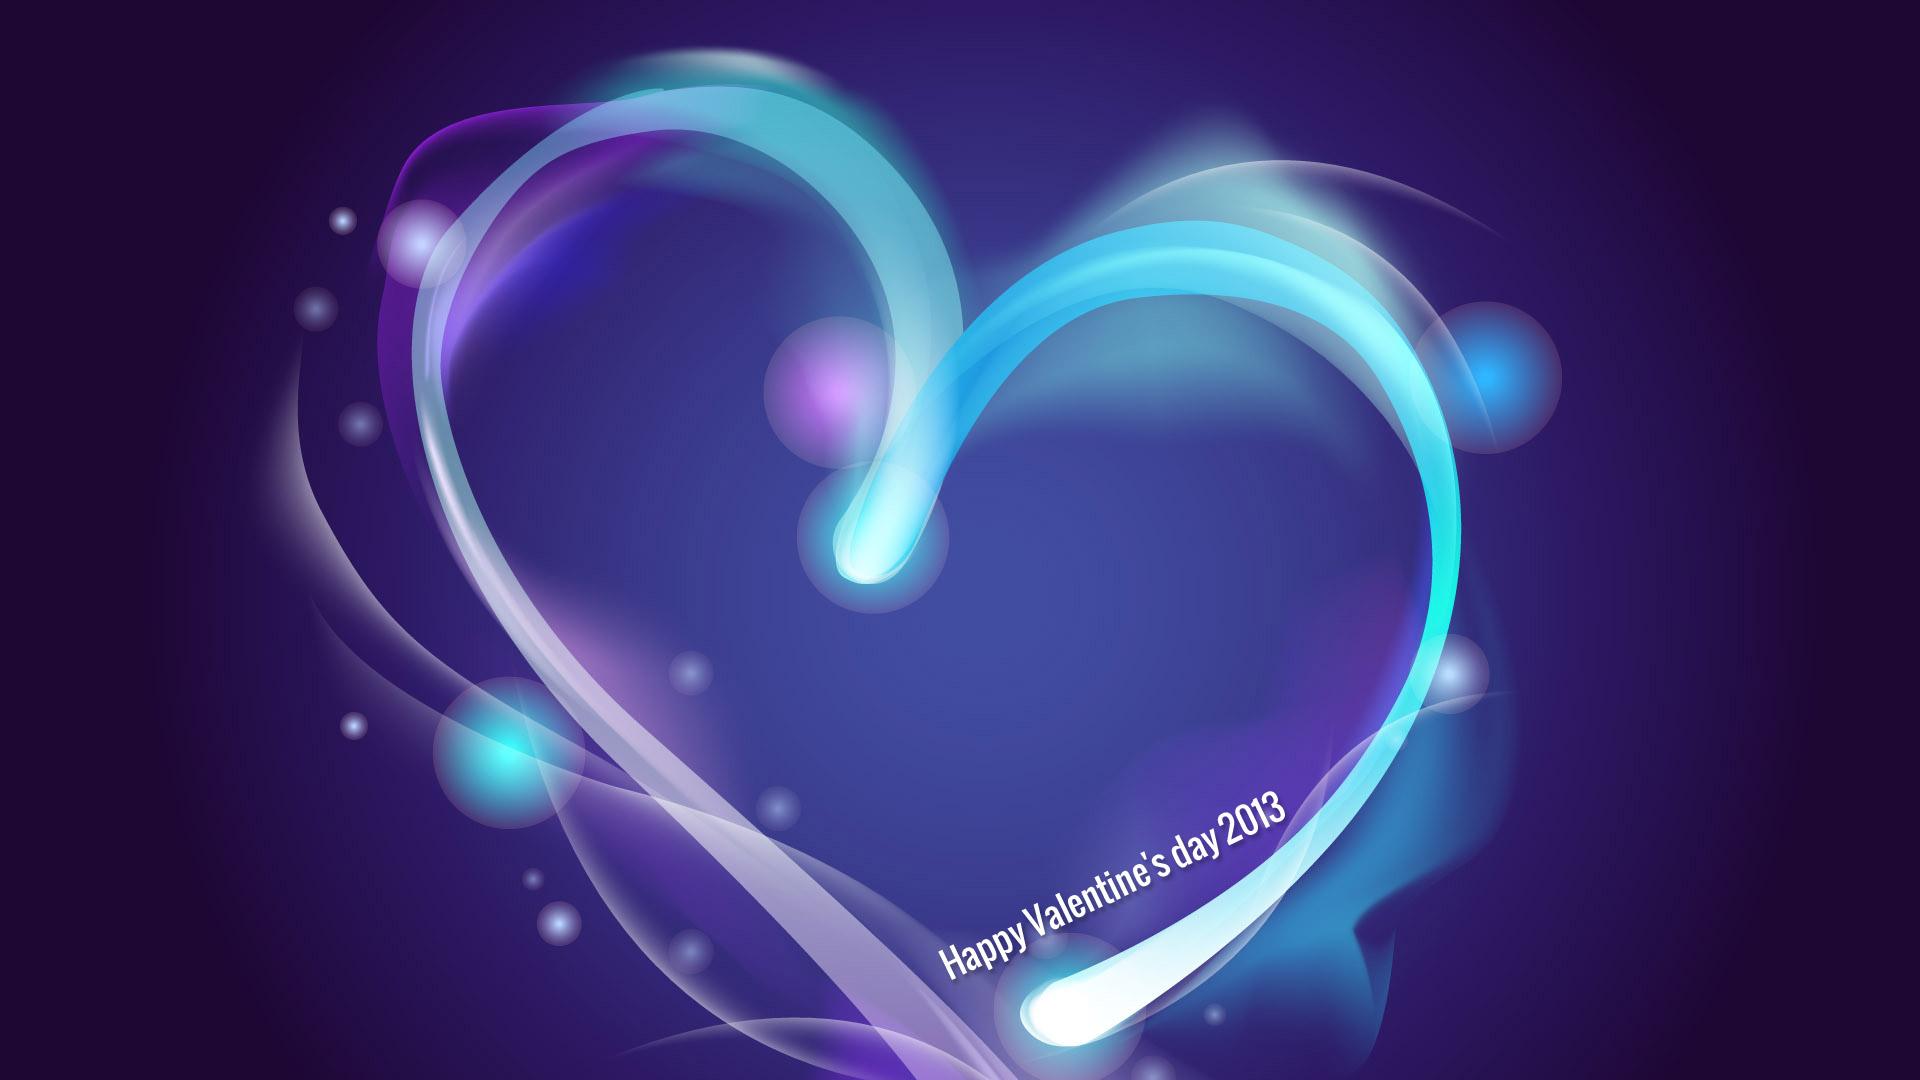 Download 1920x1080 HD Wallpaper valentines day heart abstract